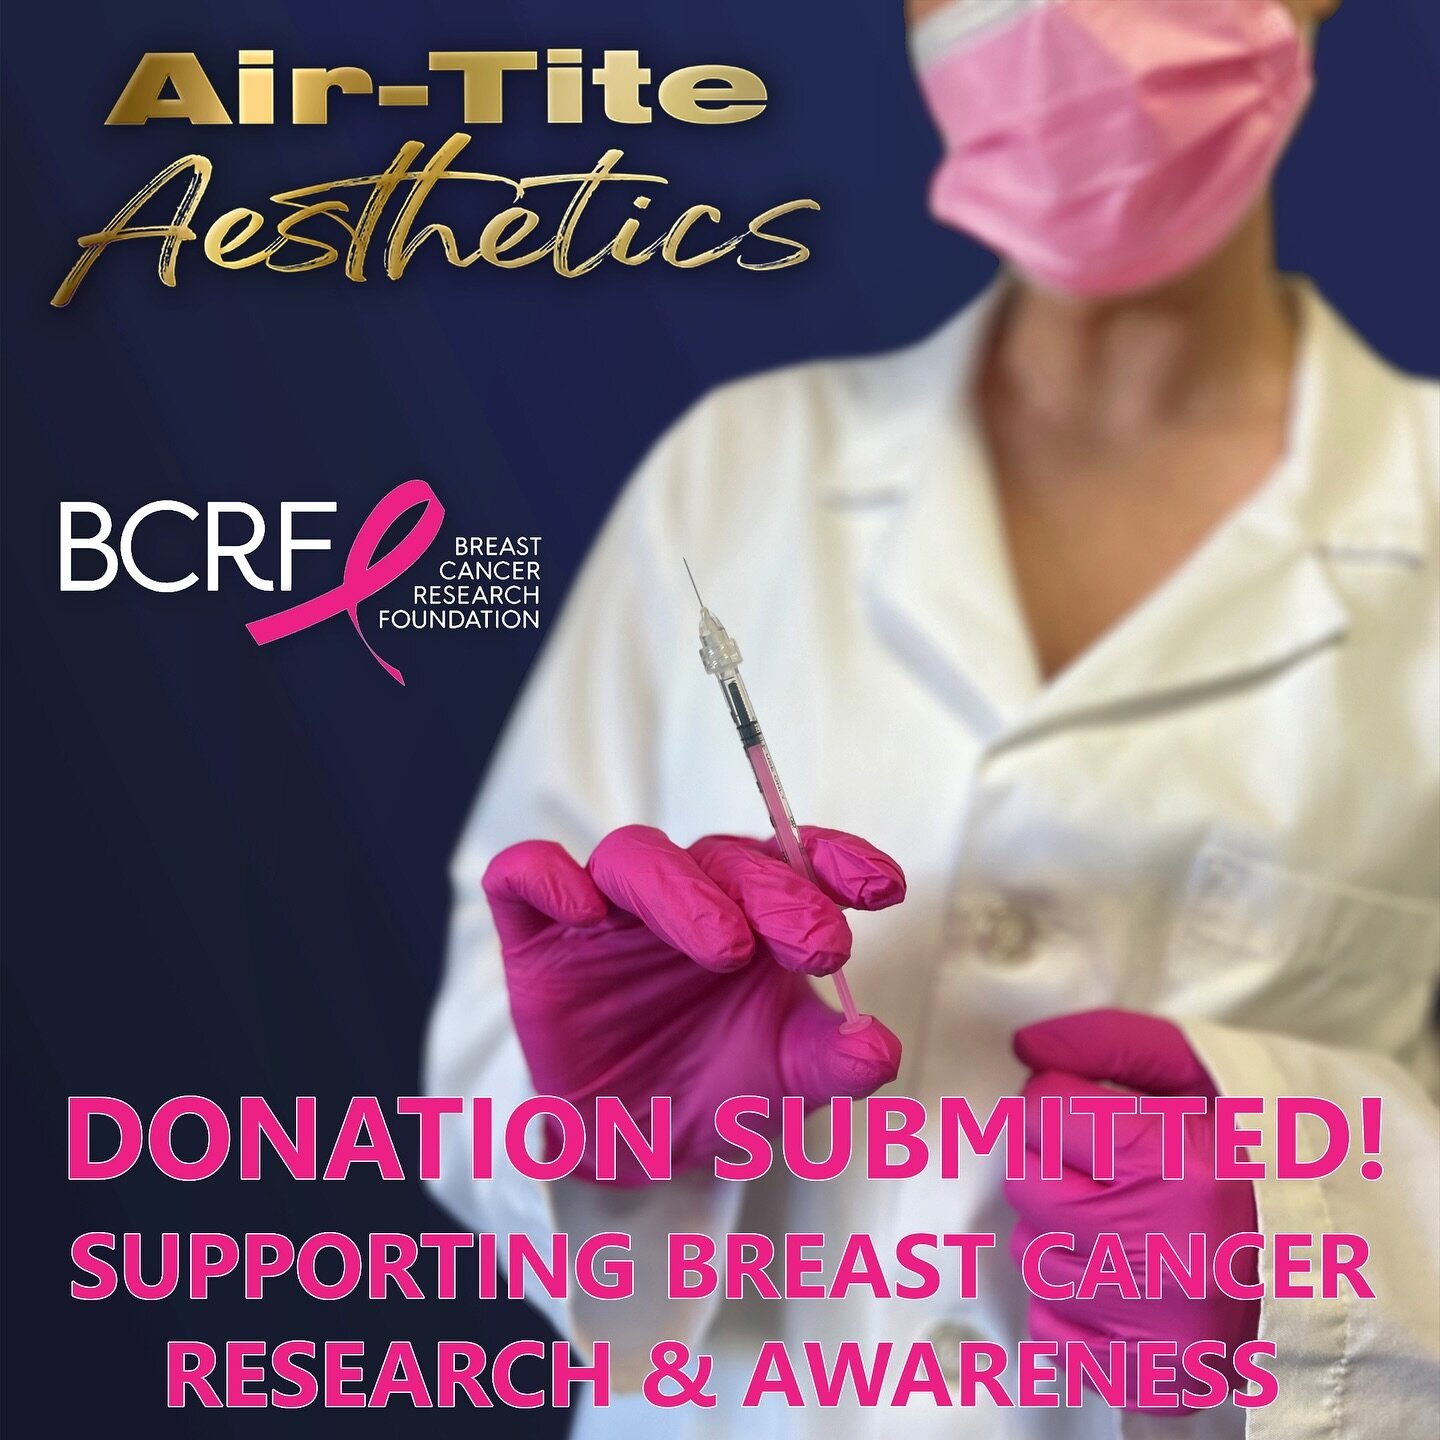 We are excited to announce we recently made our largest breast cancer donation yet thanks to you all! A portion of every purchase of one of our pink products (MinimLL Syringes, Pink Gloves, and Pink Masks) contributes to our quarterly donation to var